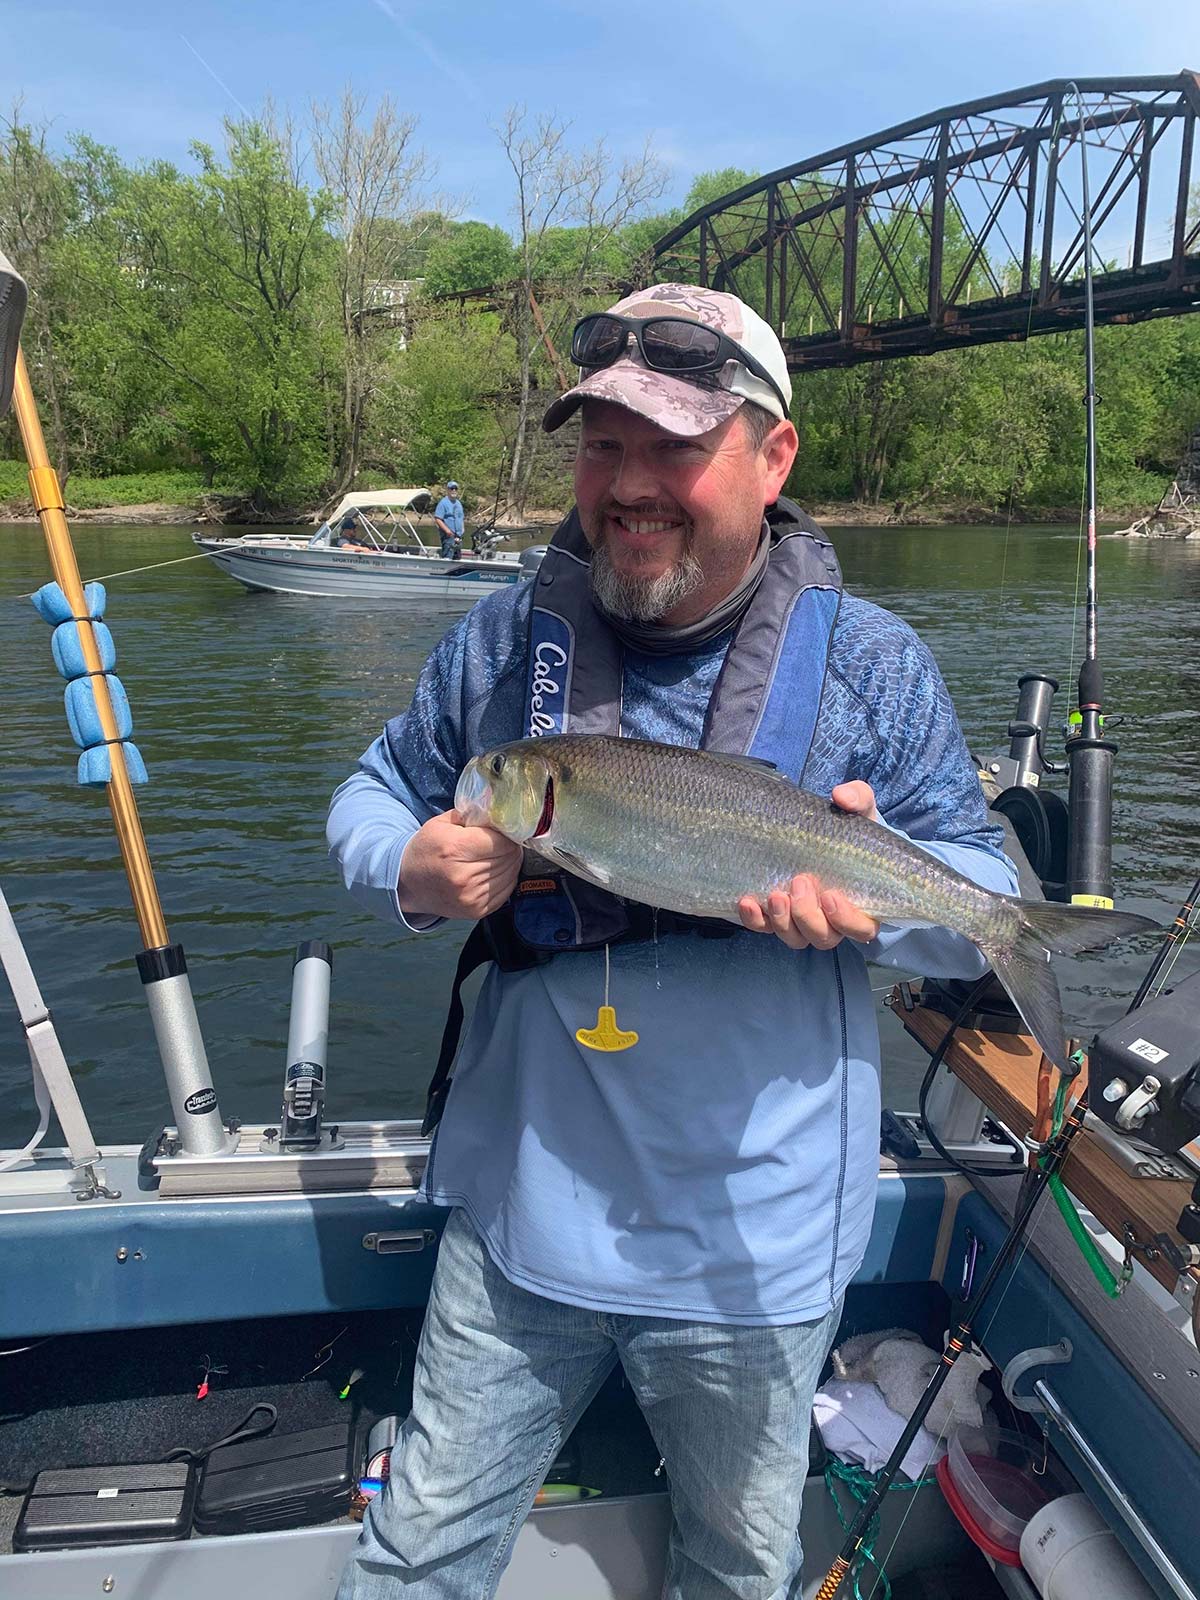 Spring Shad: Delaware River '22 Forecast - The Fisherman